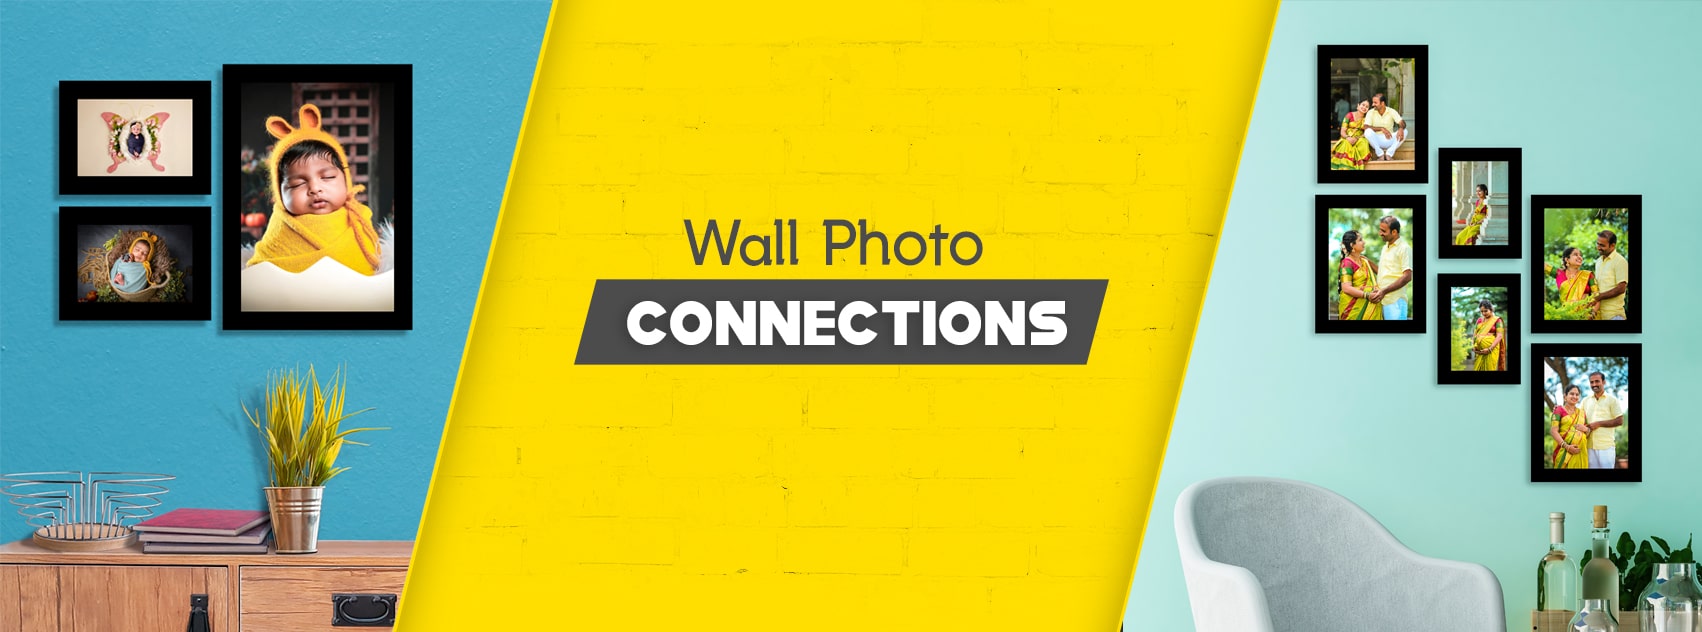 wallPhotoConnections-min